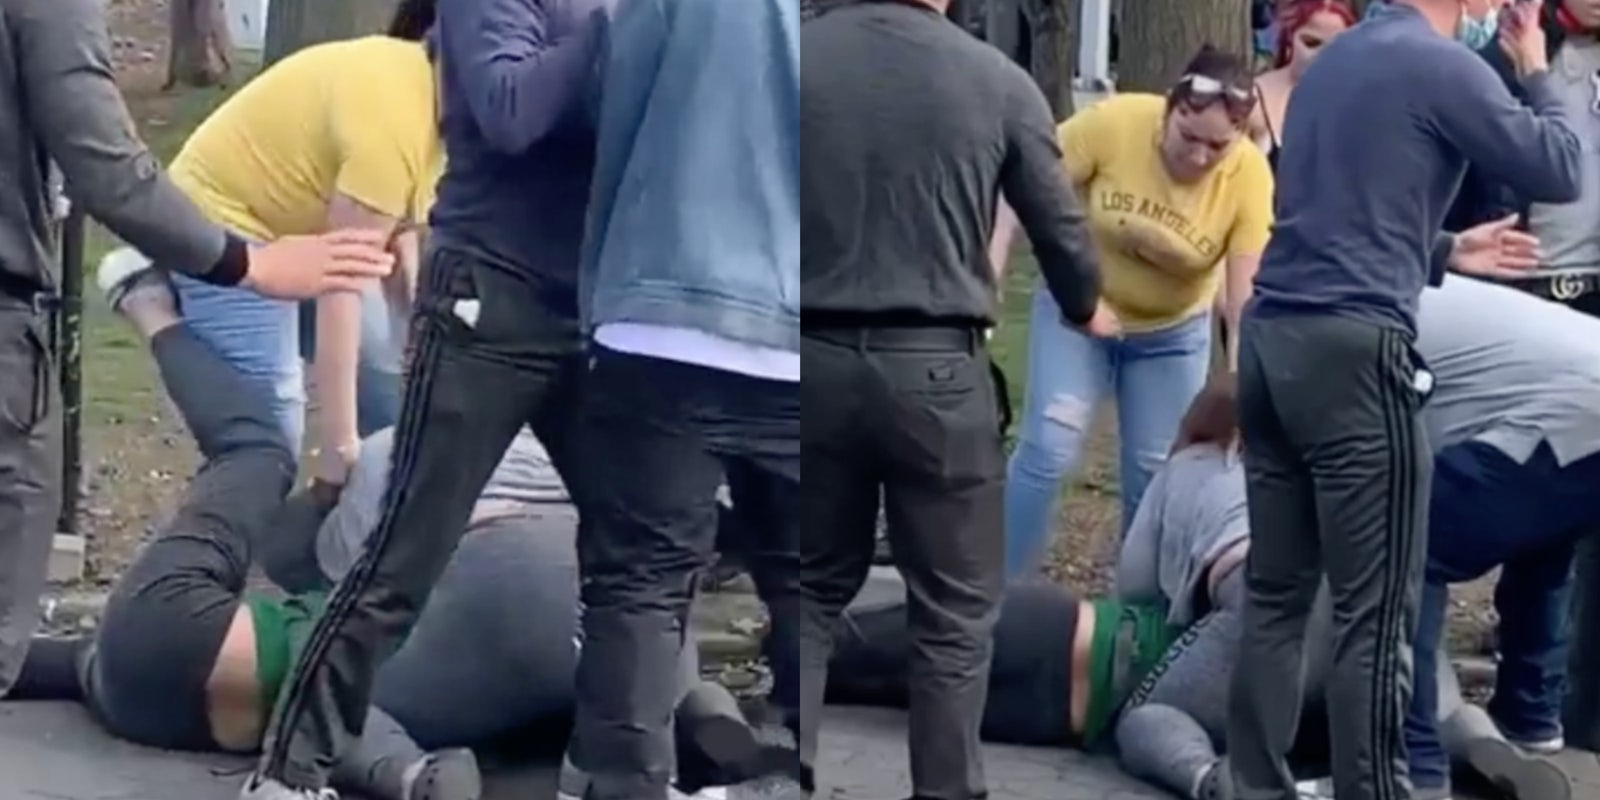 family punching woman on ground